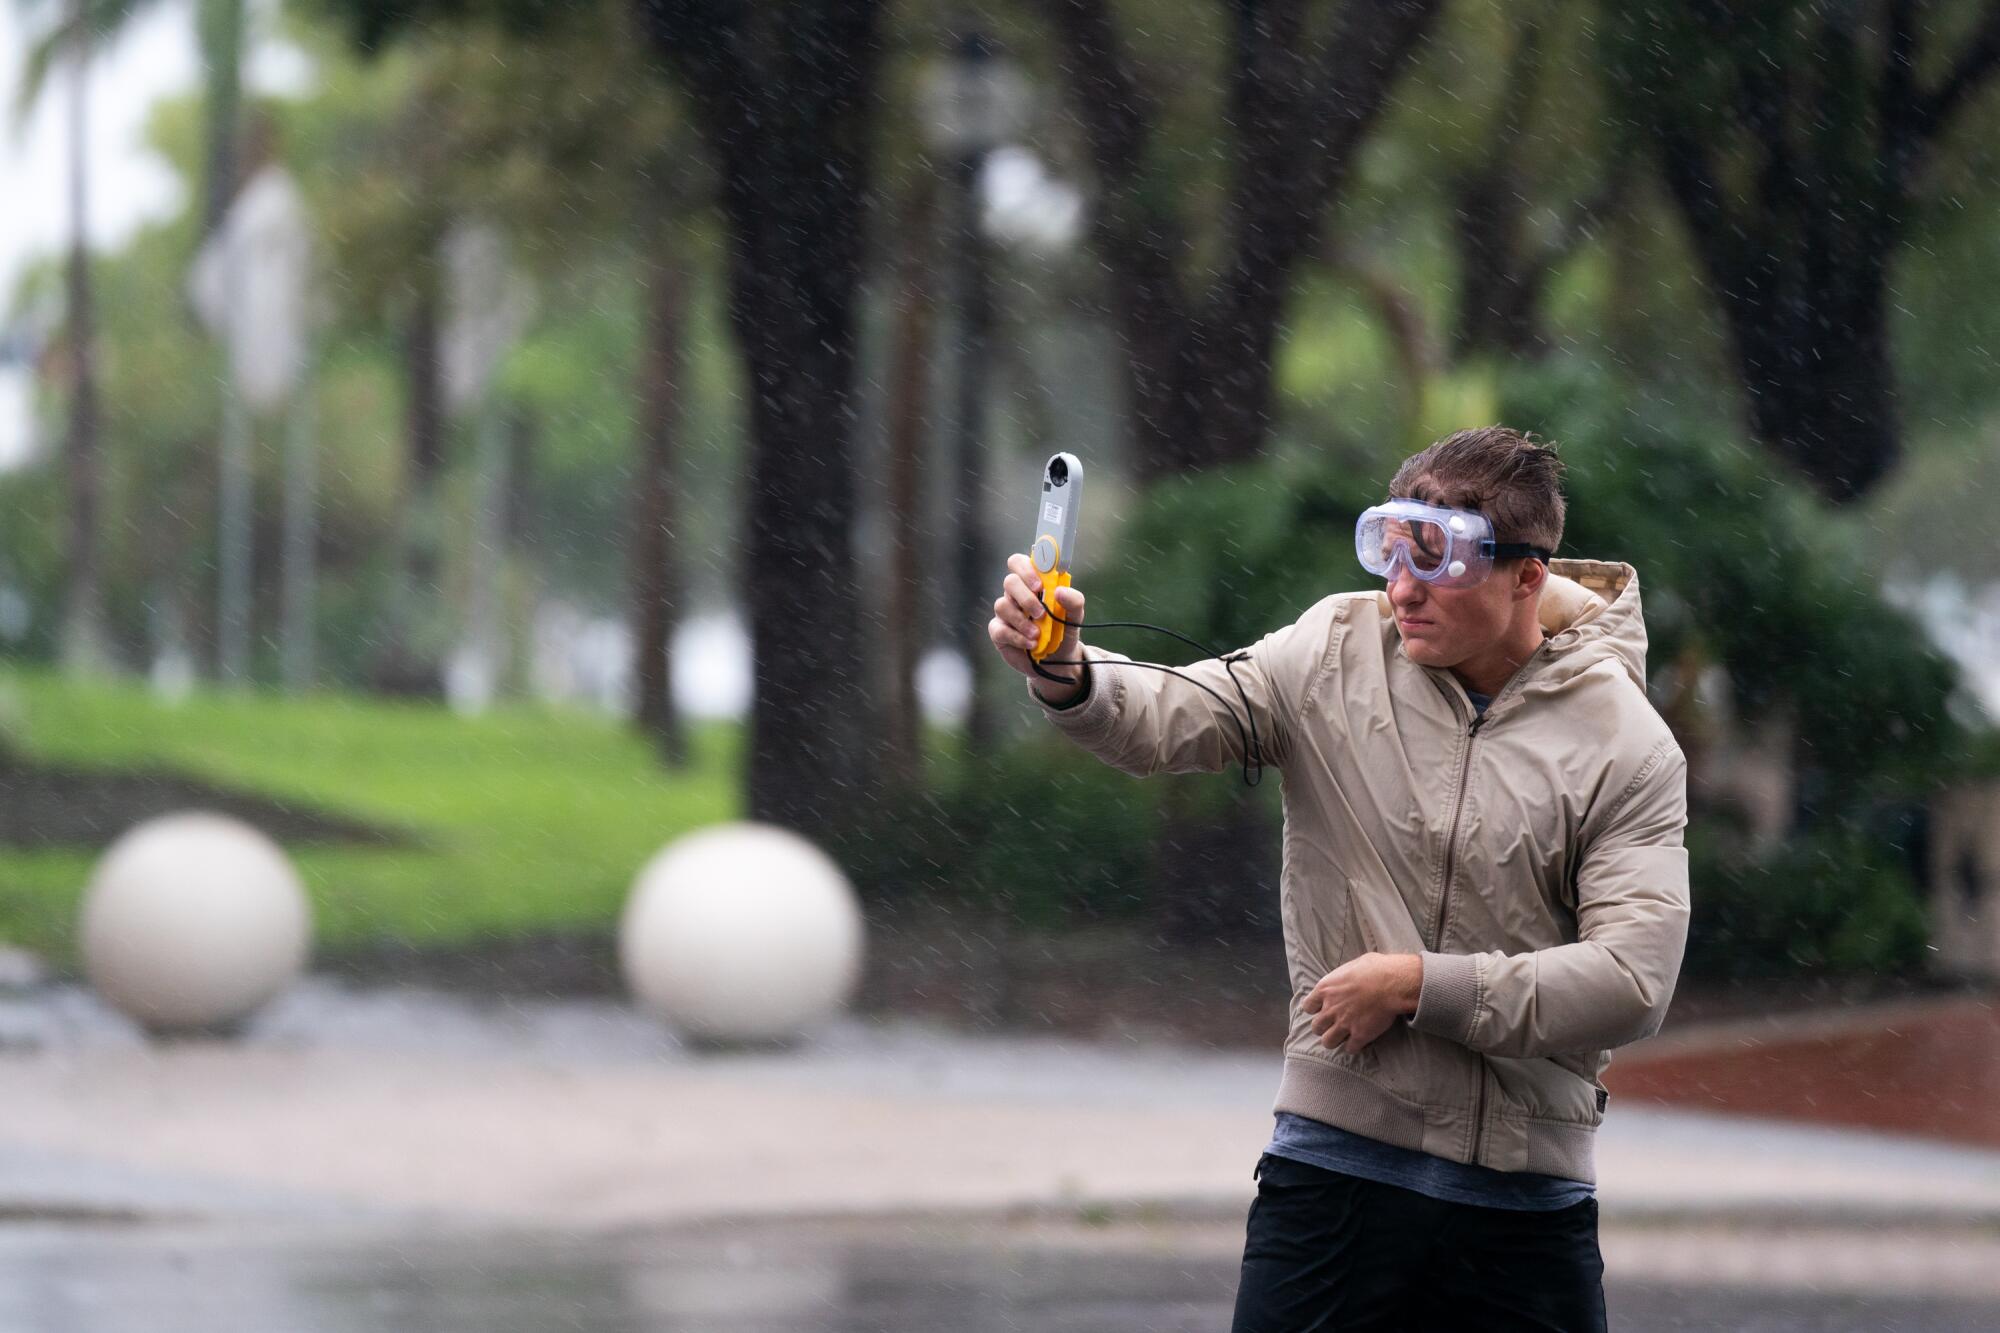 A man in goggles with a hand-held instrument stands in the wind and rain.